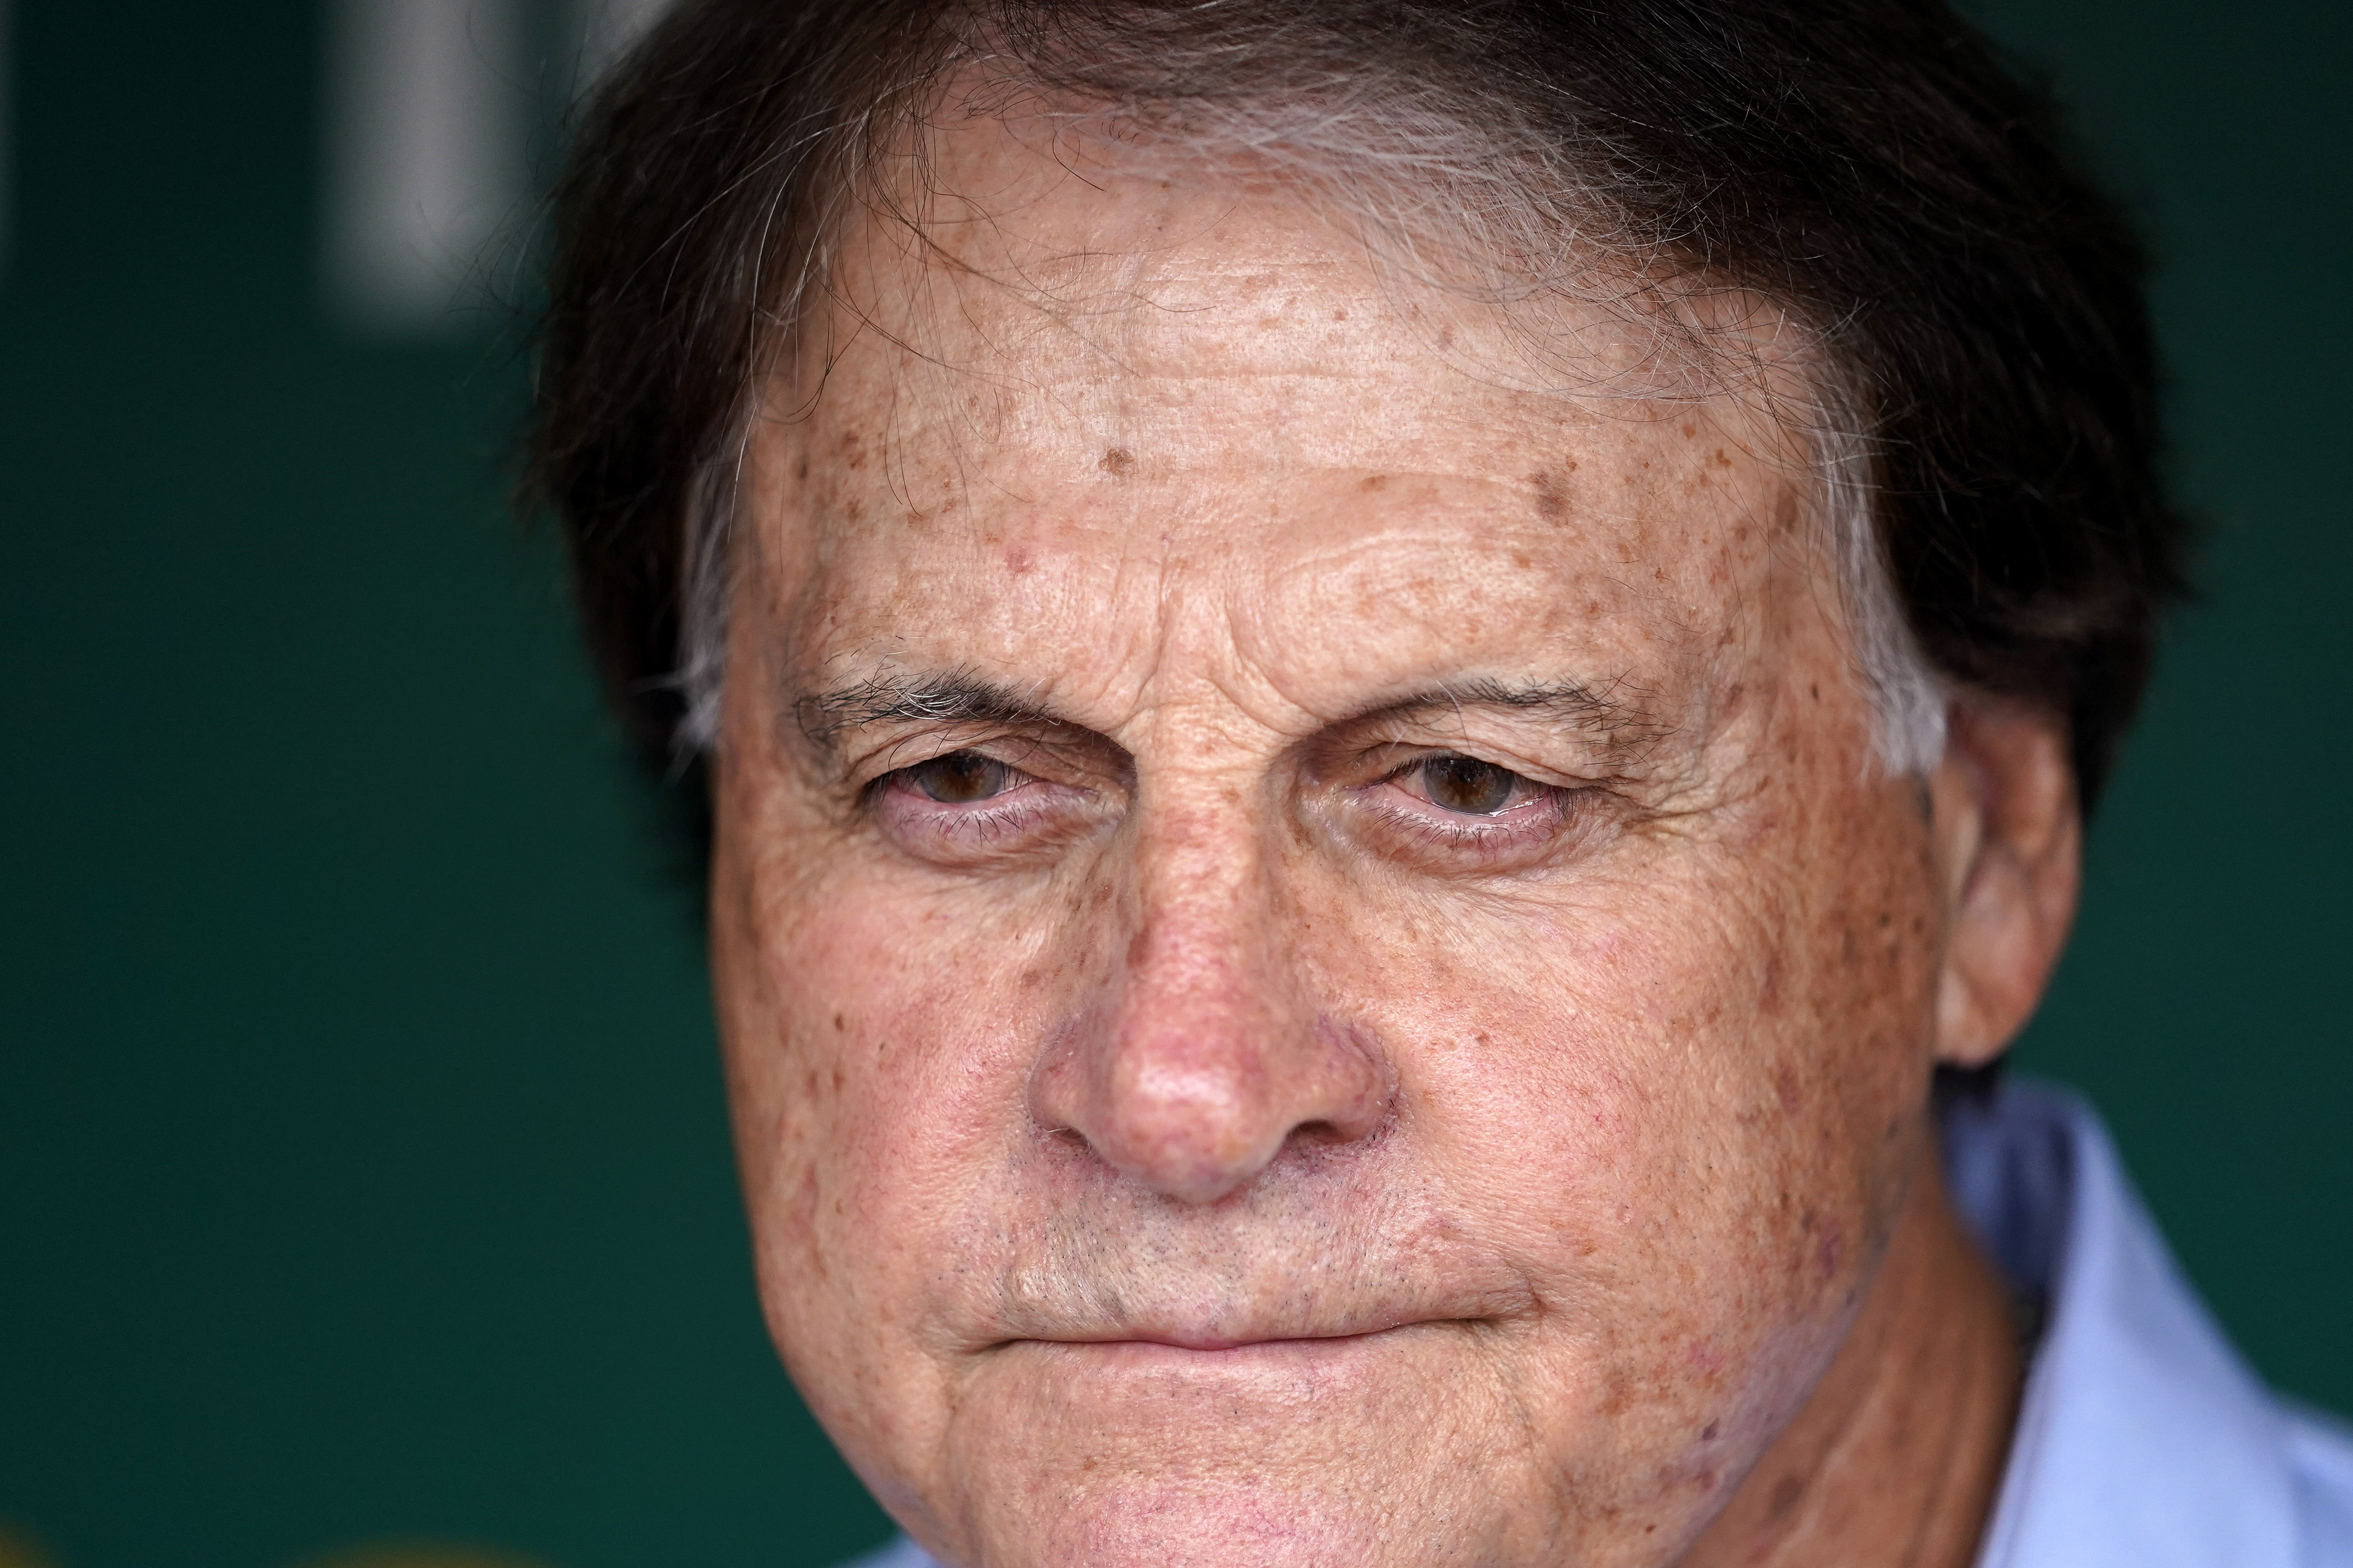 Tony La Russa out indefinitely as White Sox manager with heart issue